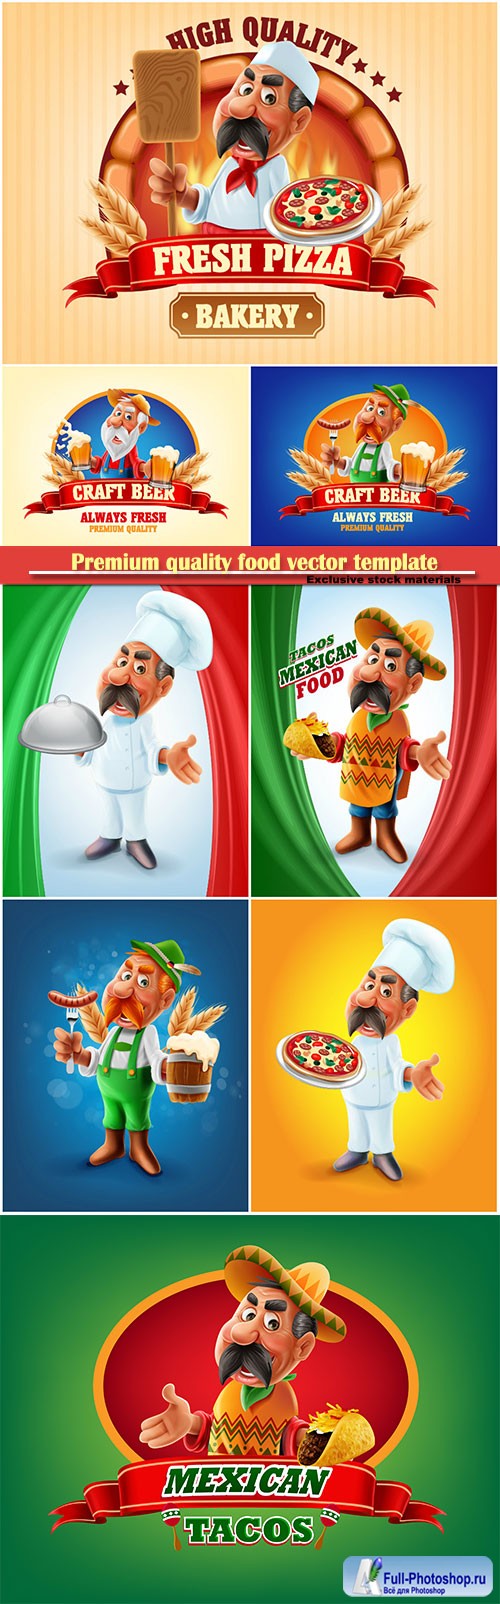 Premium quality food vector template, pizza, beer, Mexican food